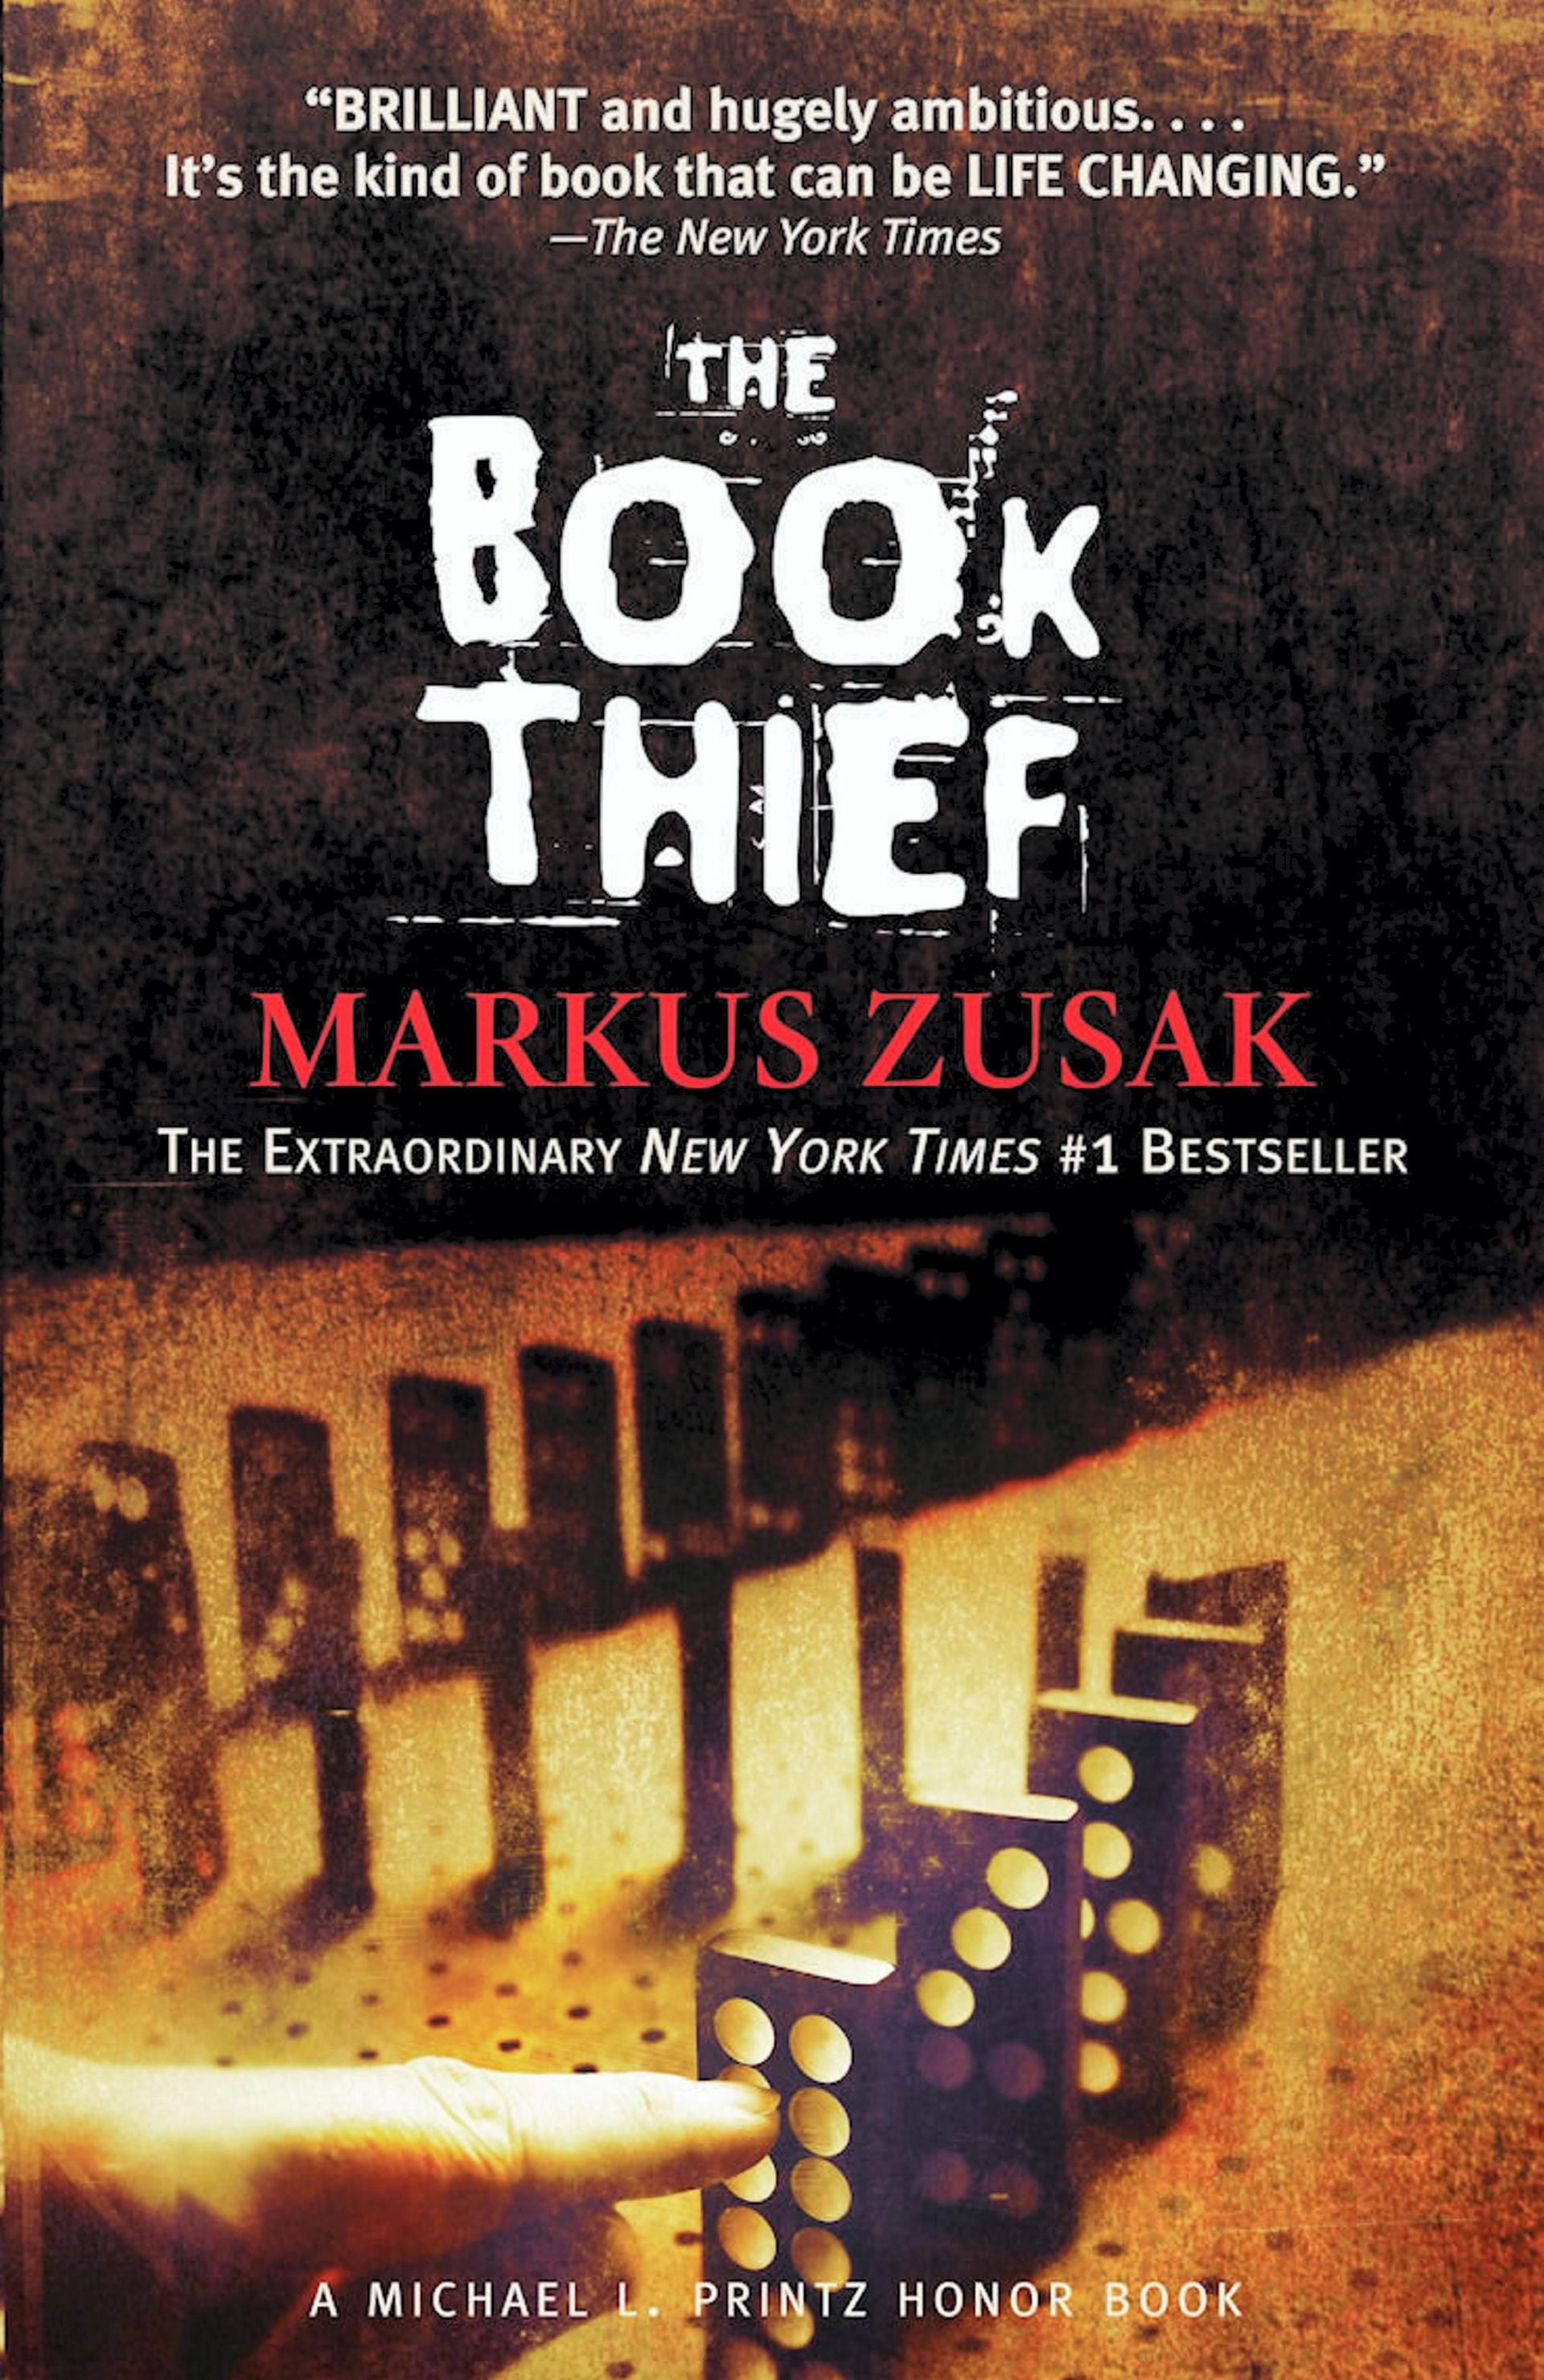 Why 'The Book Thief' author Markus Zusak believes 'a little bit of  ignorance can go a long way'